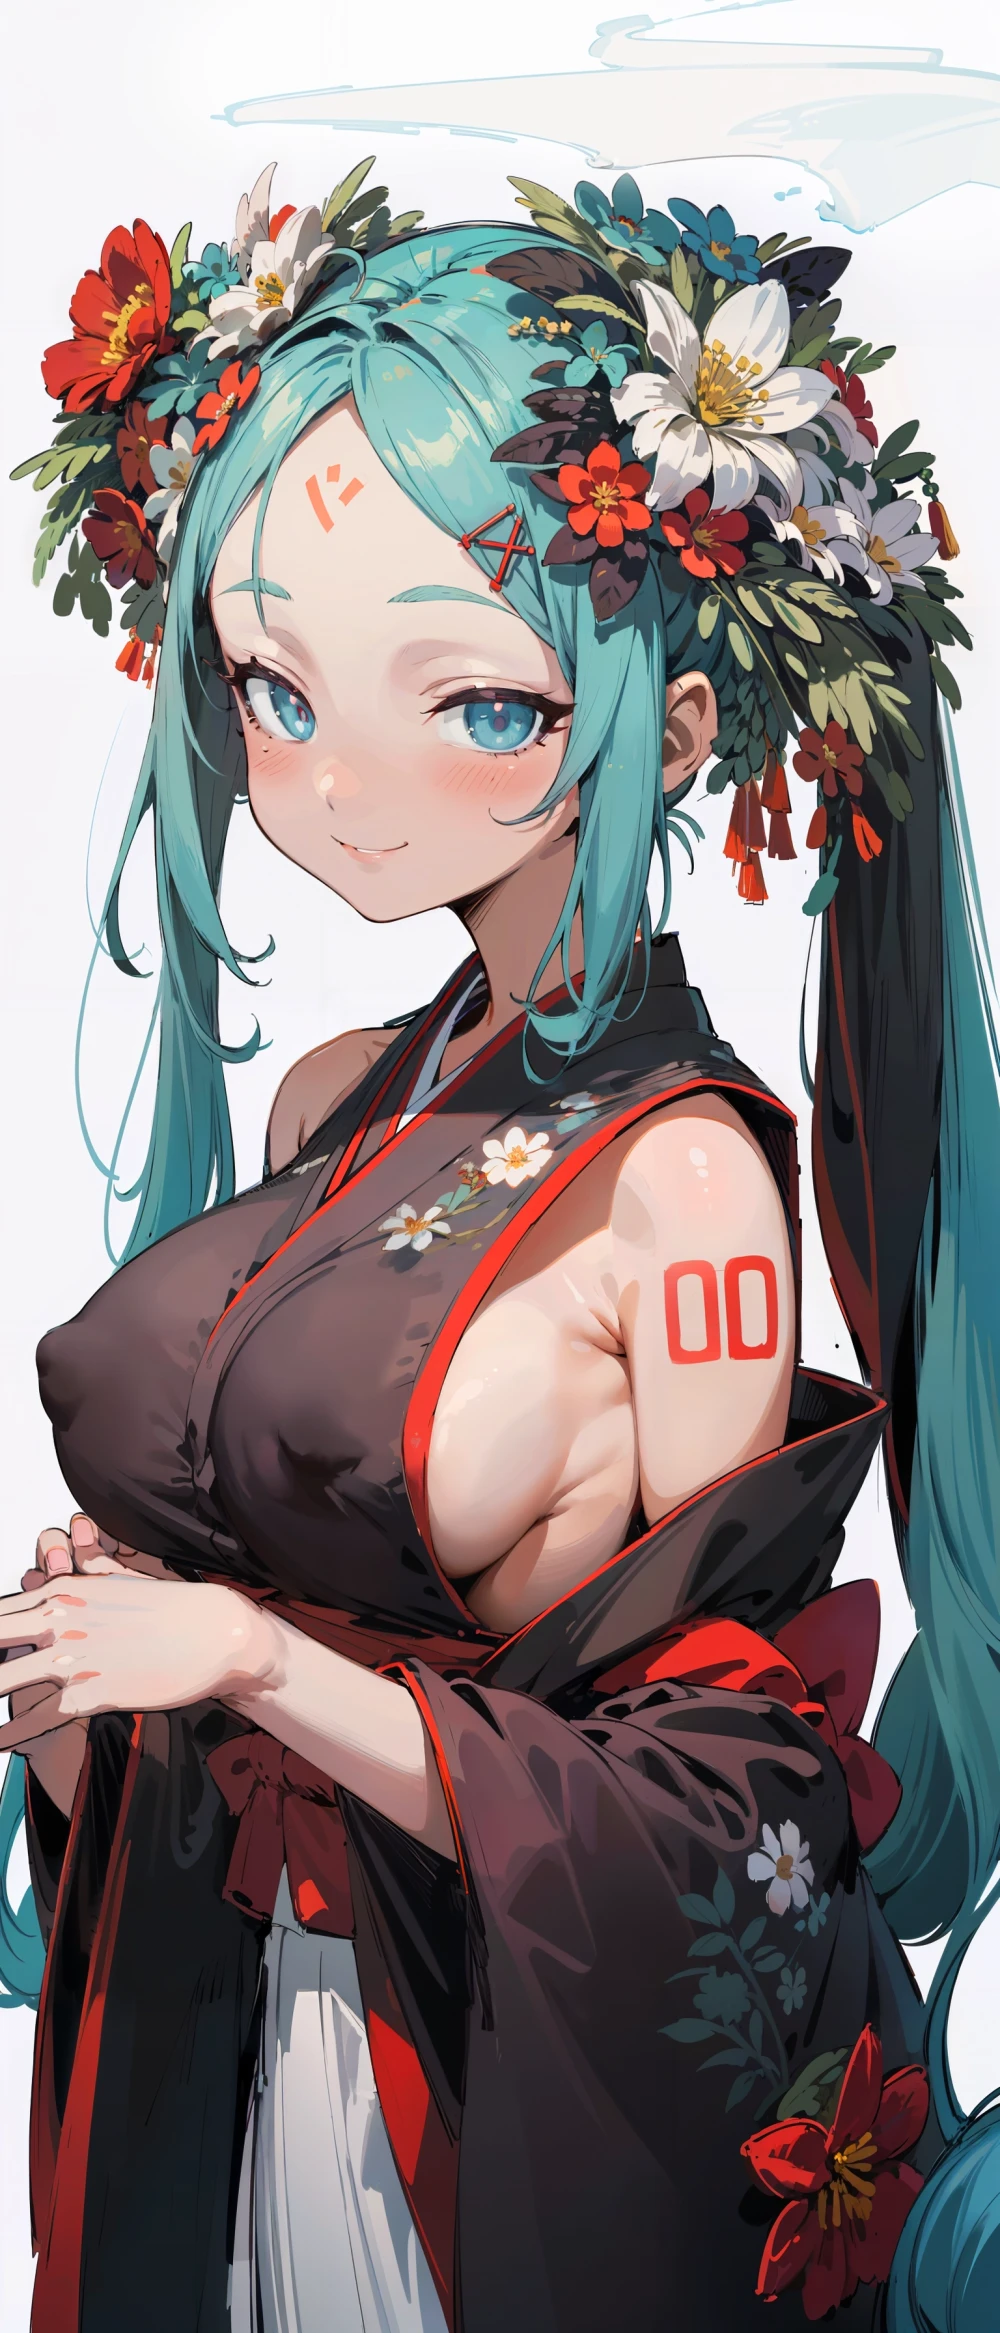 hatsune-miku-anime-style-all-ages-2-38